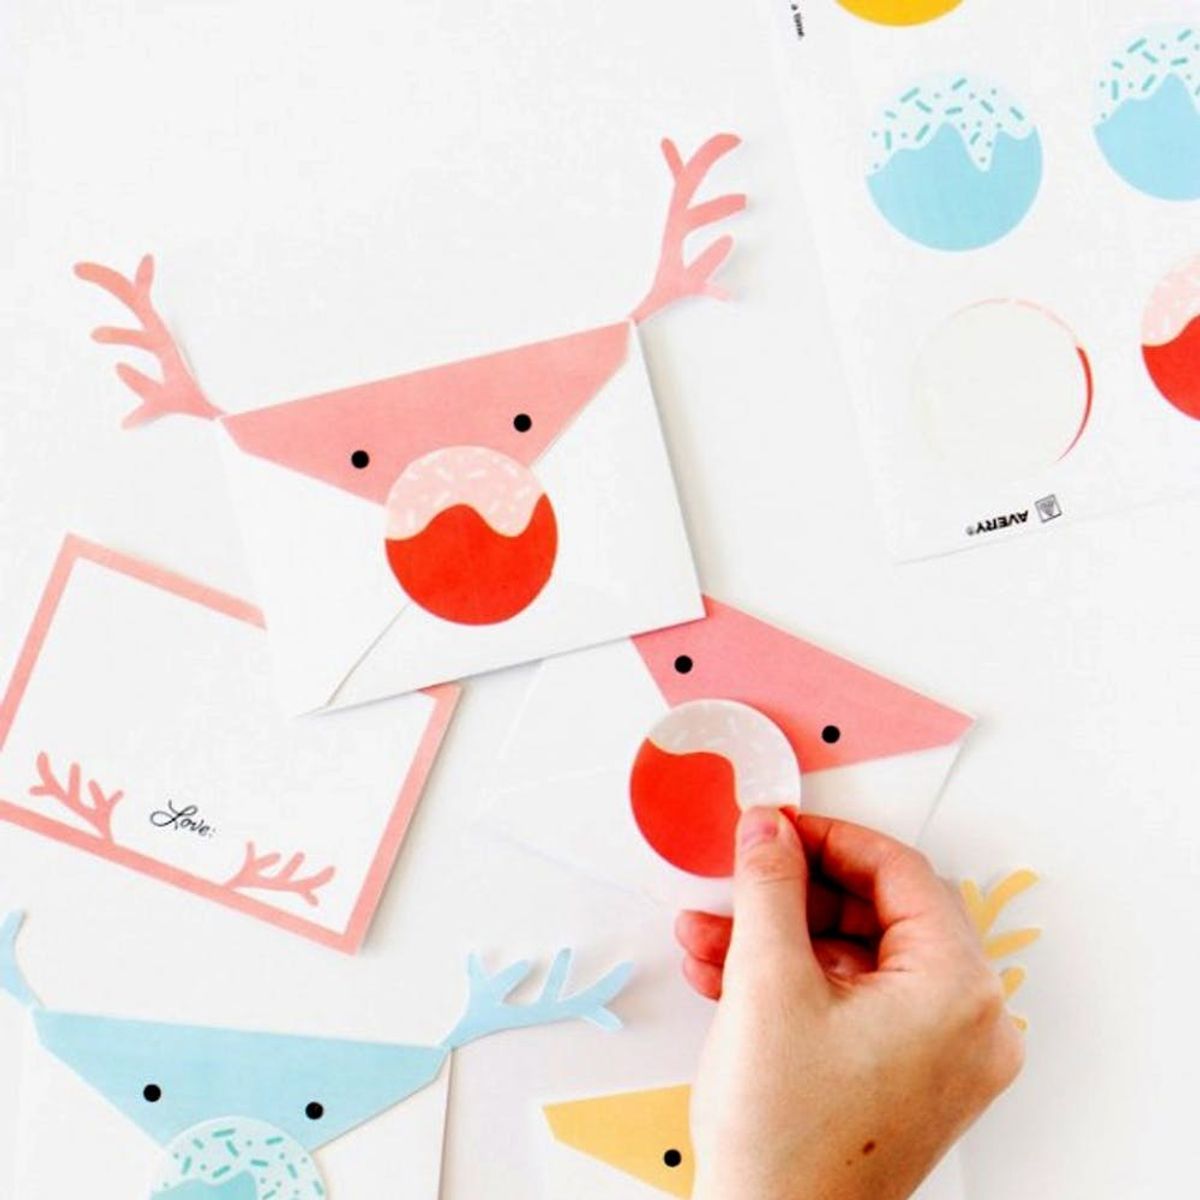 Warm Up Your Printer for These 20 Holiday Printables